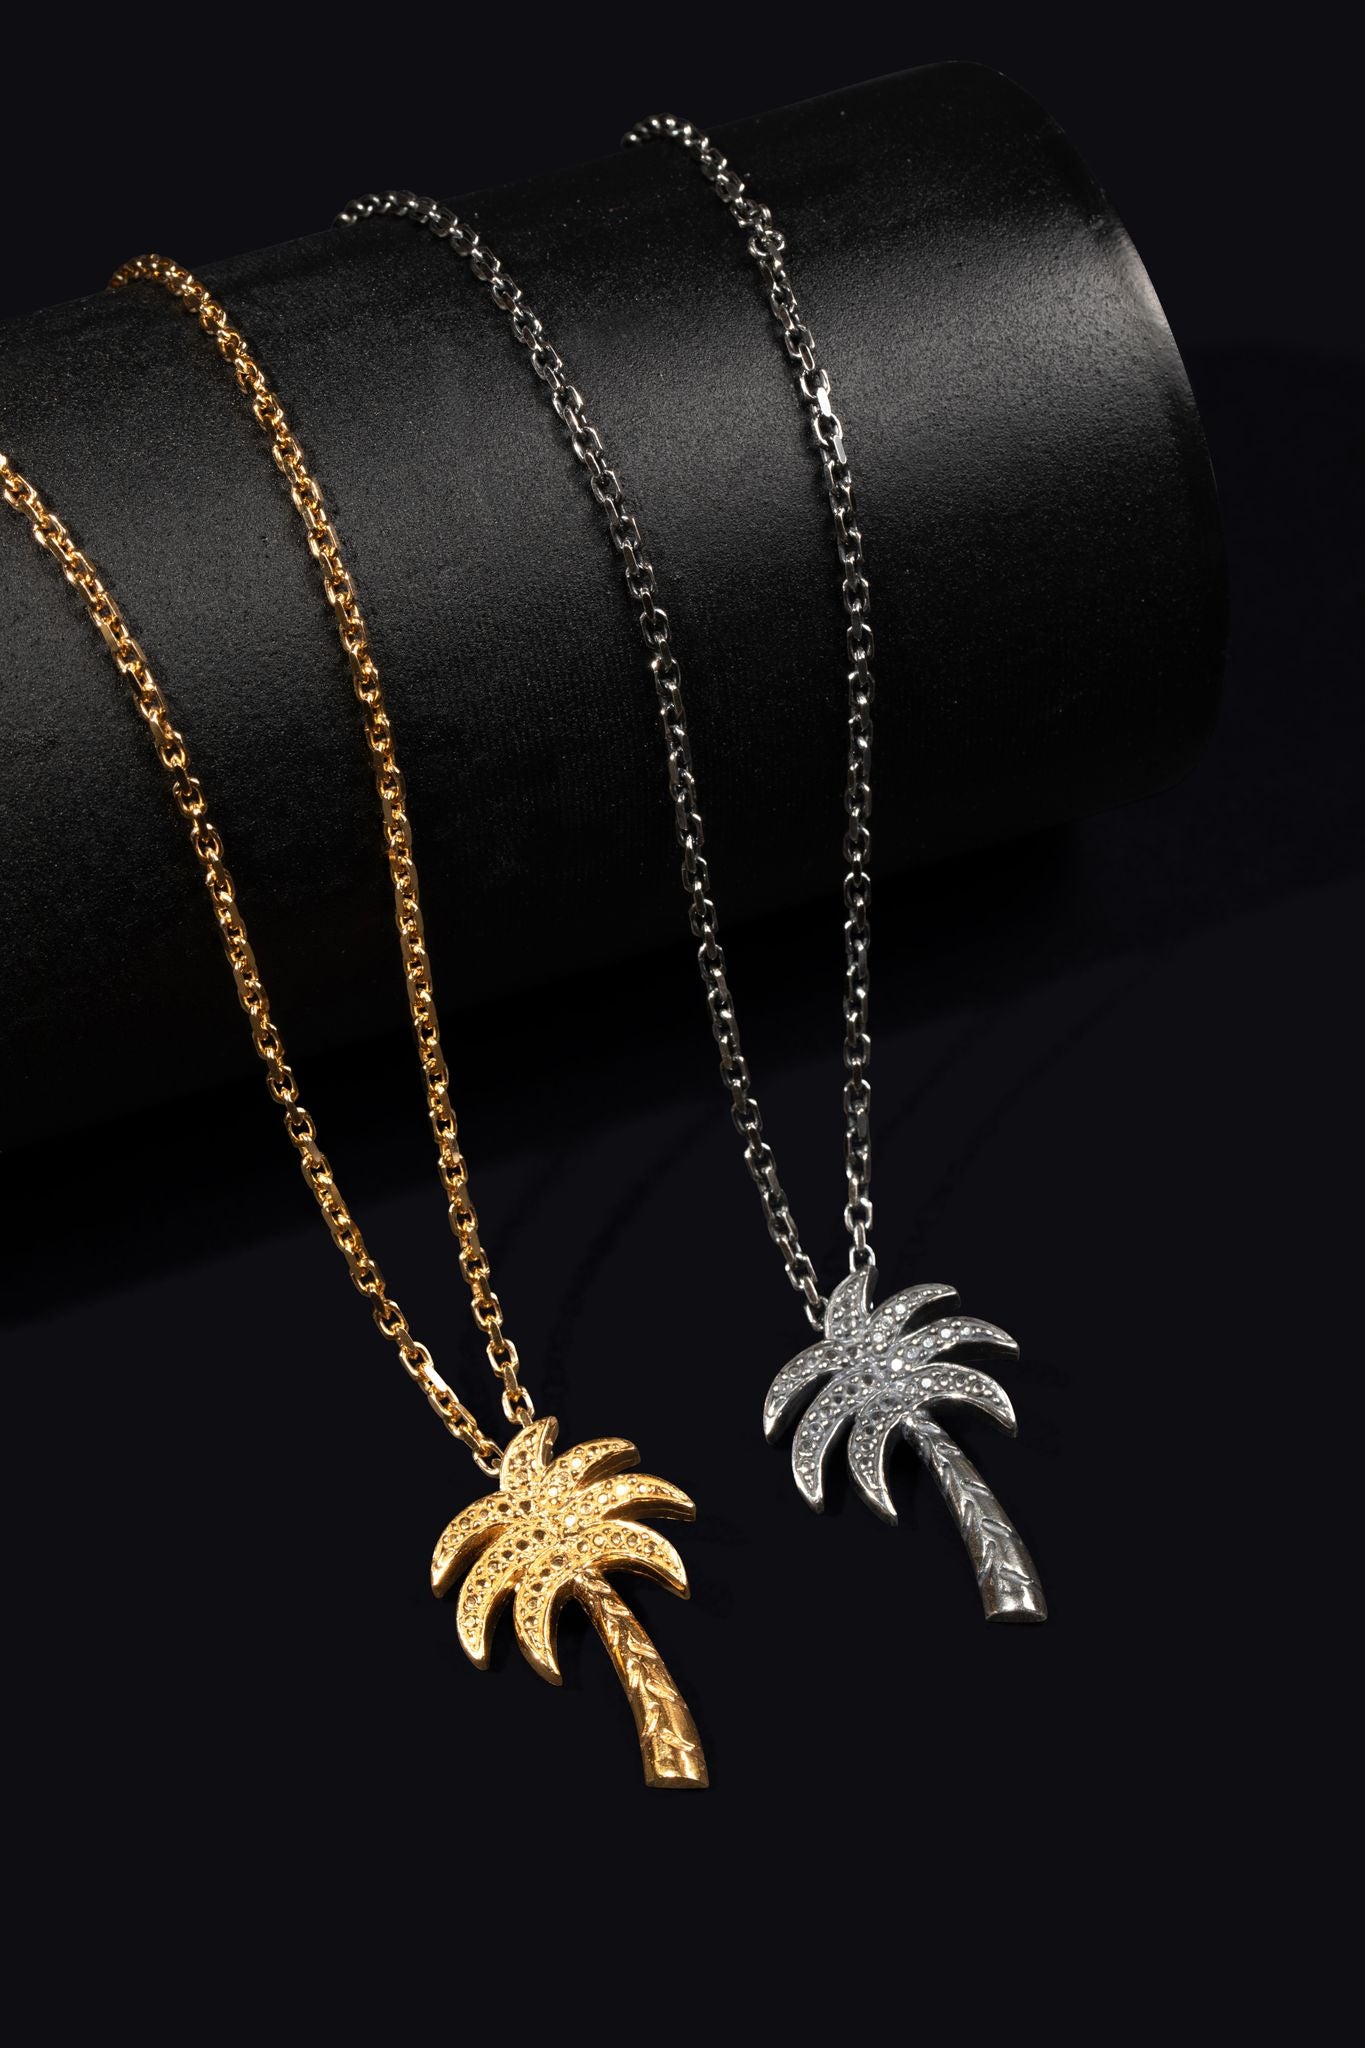 Palm Tree Crew Women's Necklace Gold